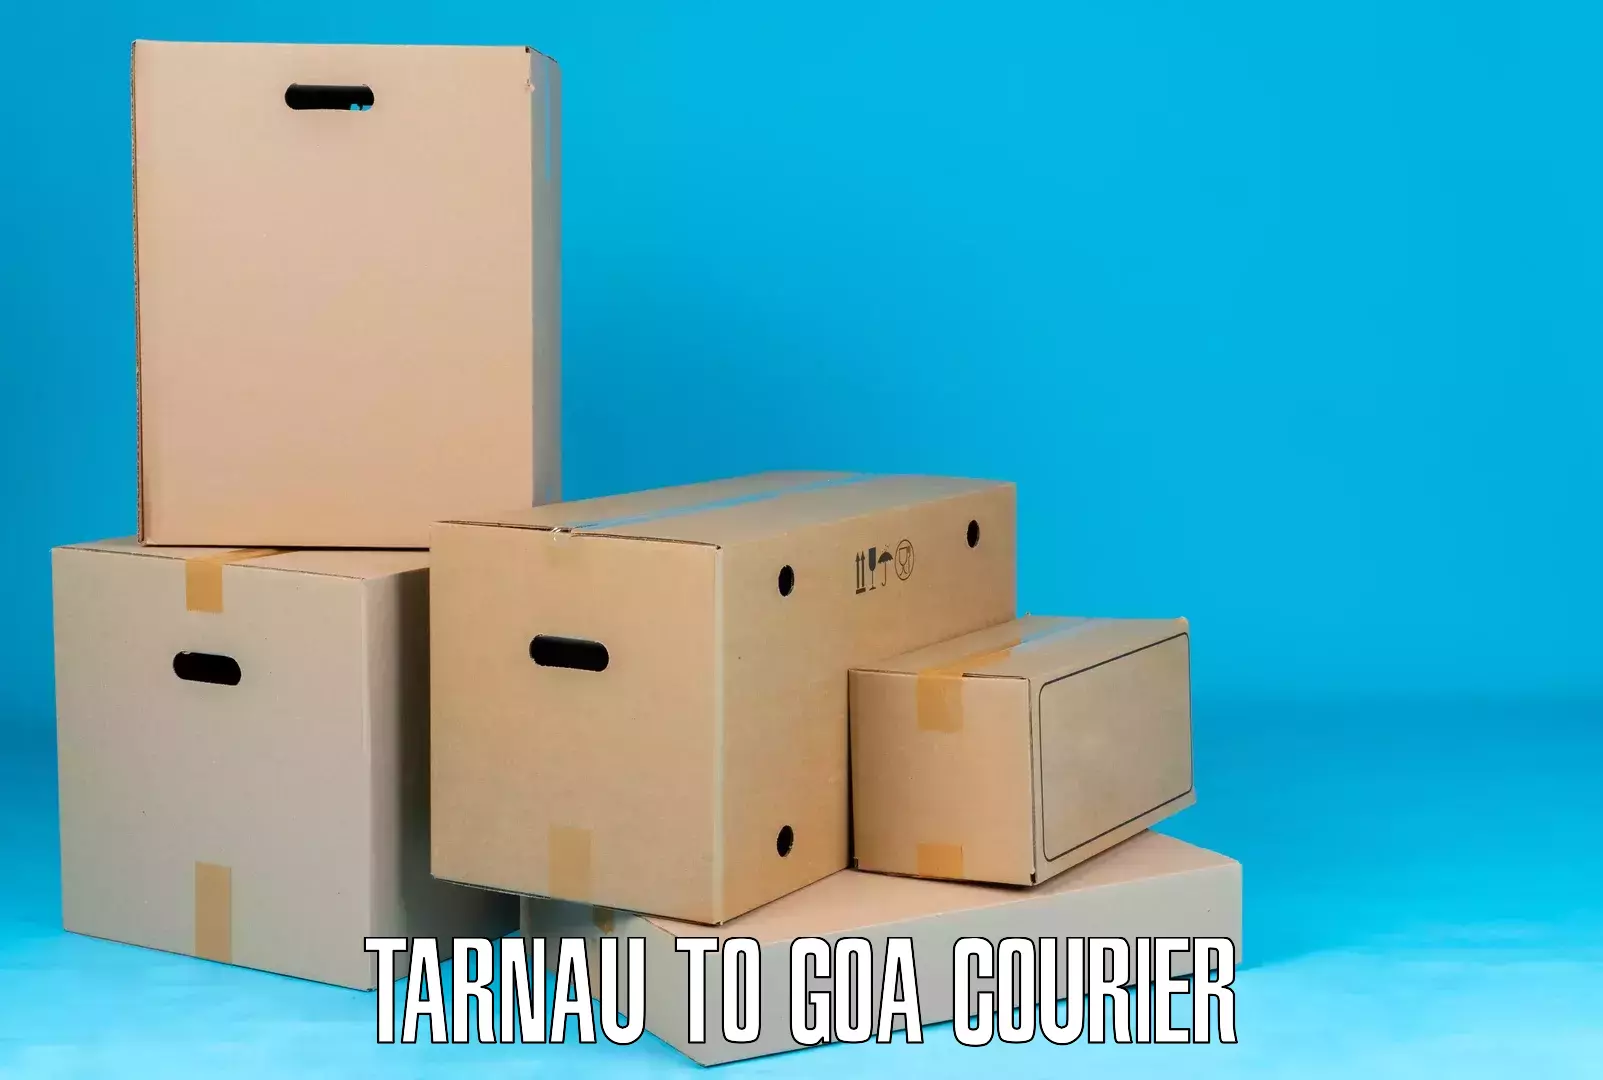 Package delivery network Tarnau to Goa